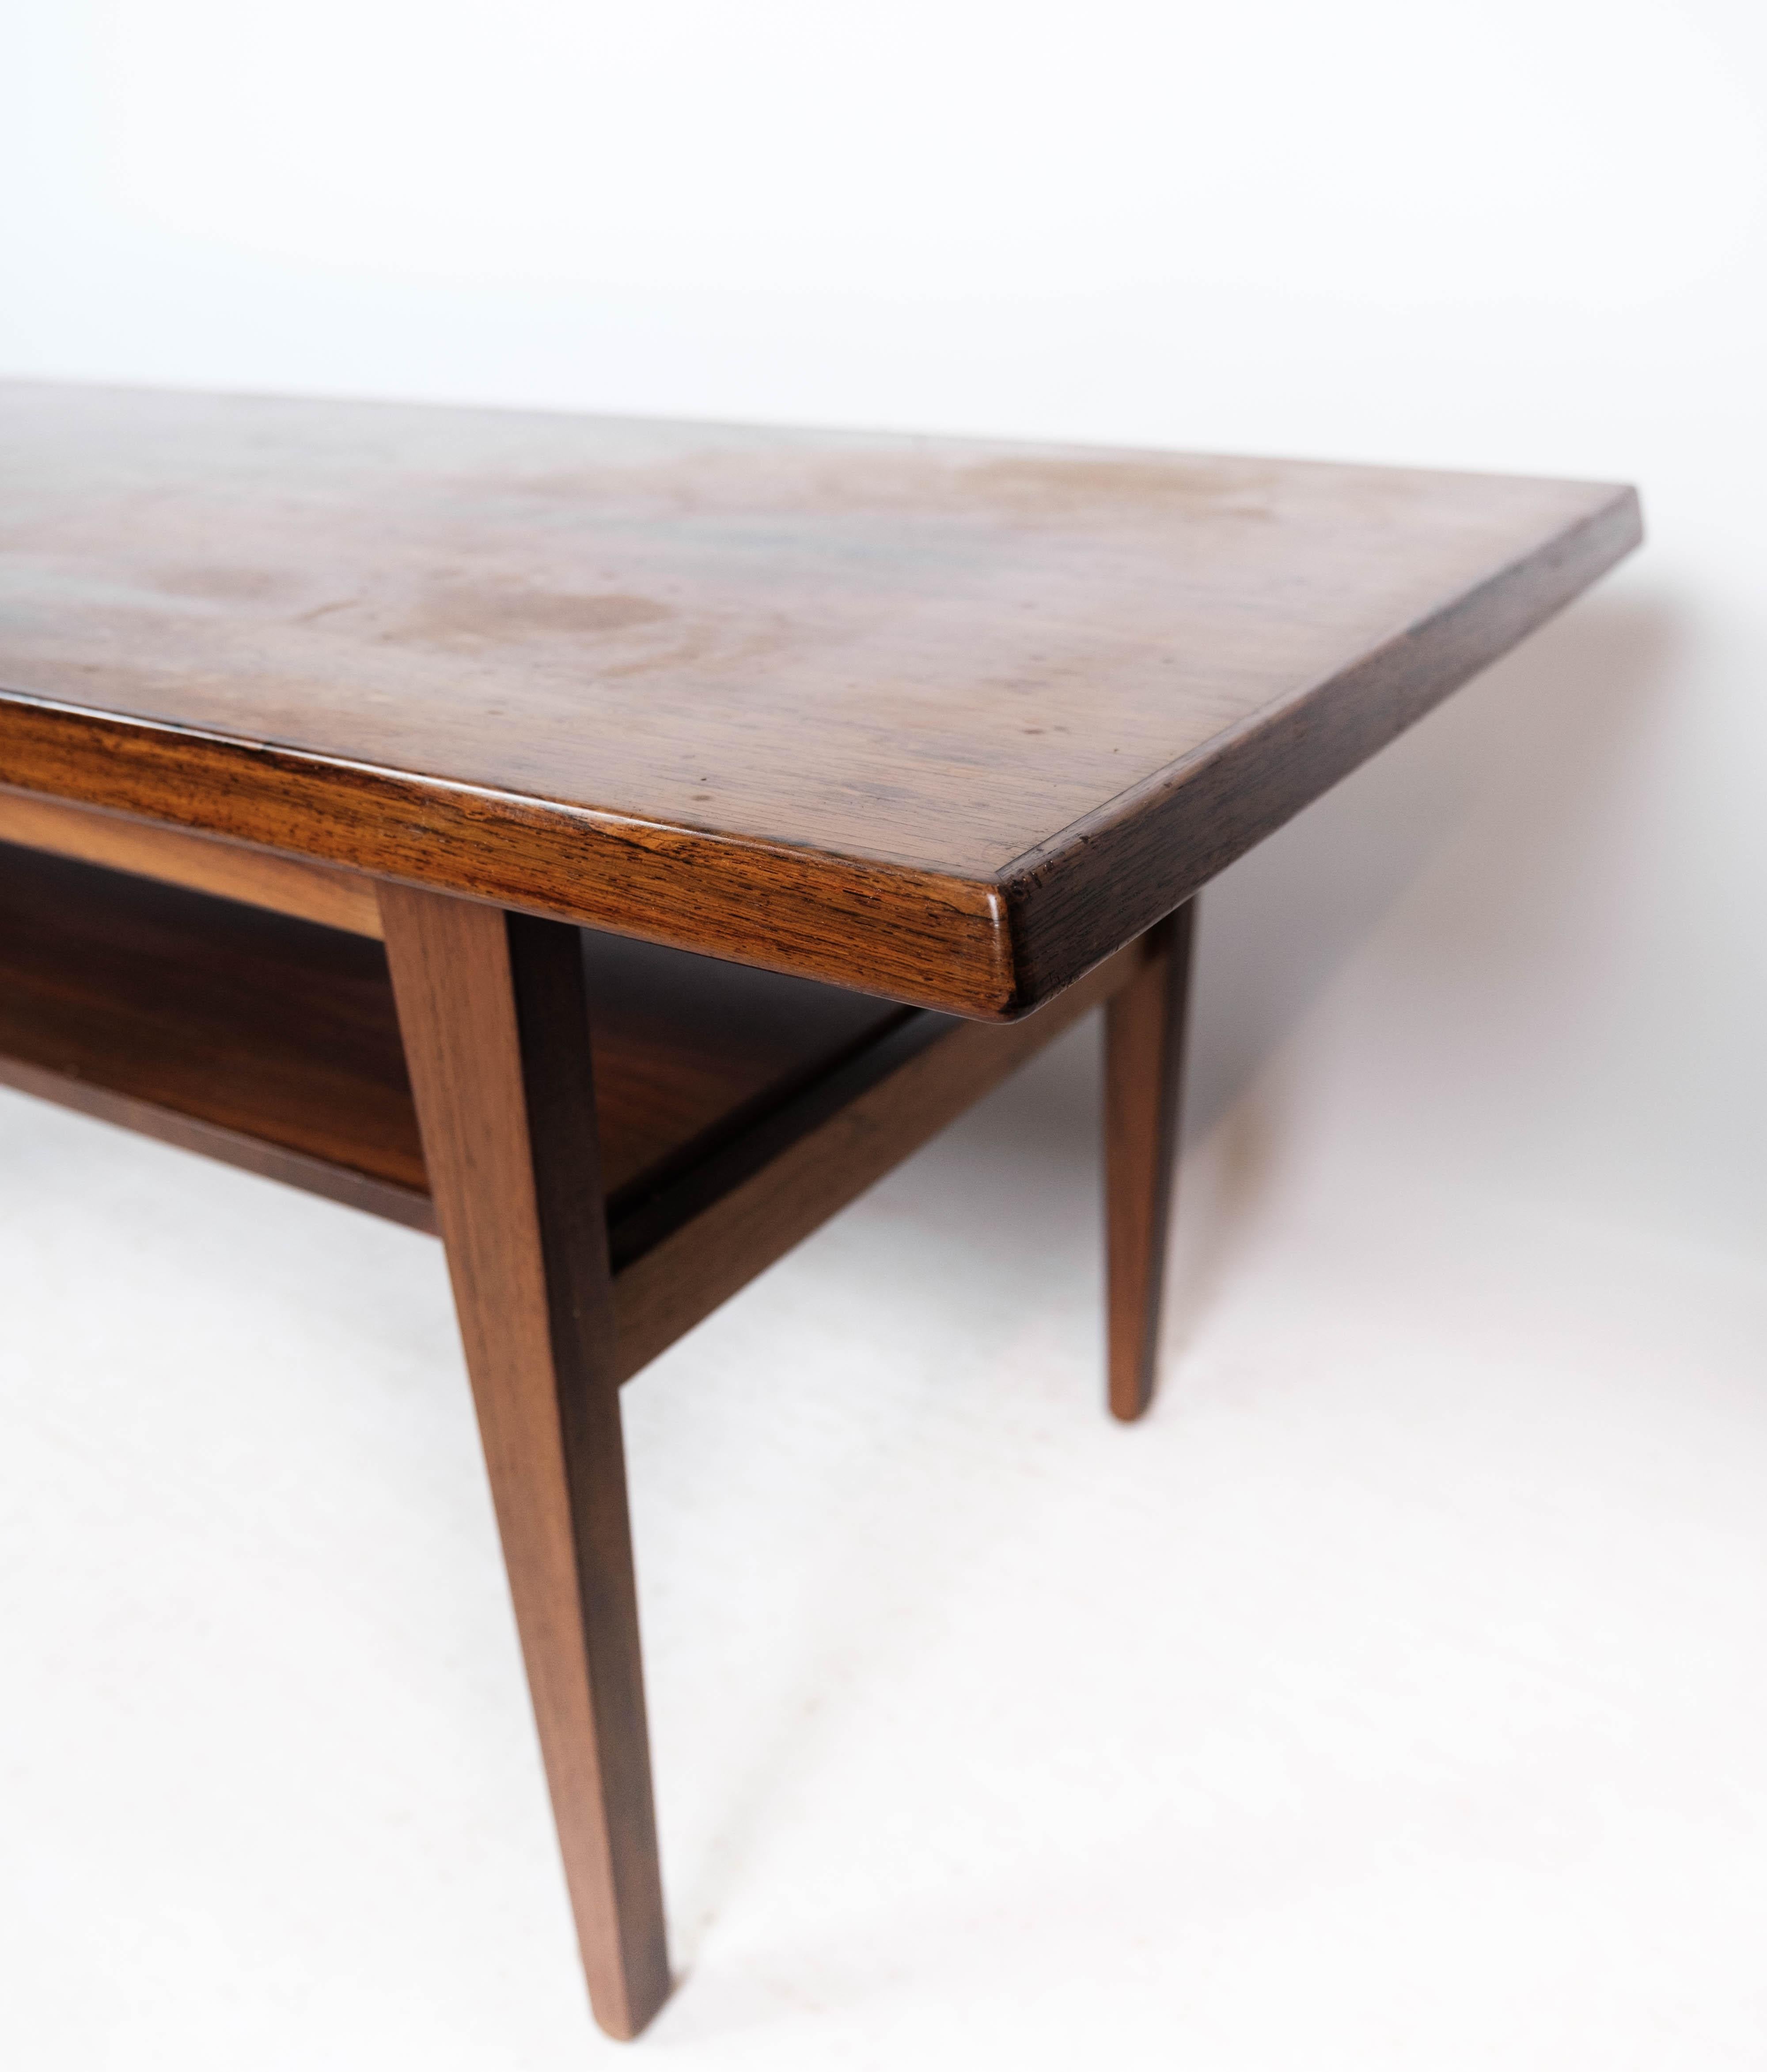 Mid-Century Modern Coffee Table Made In Rosewood With Shelf From 1960s For Sale